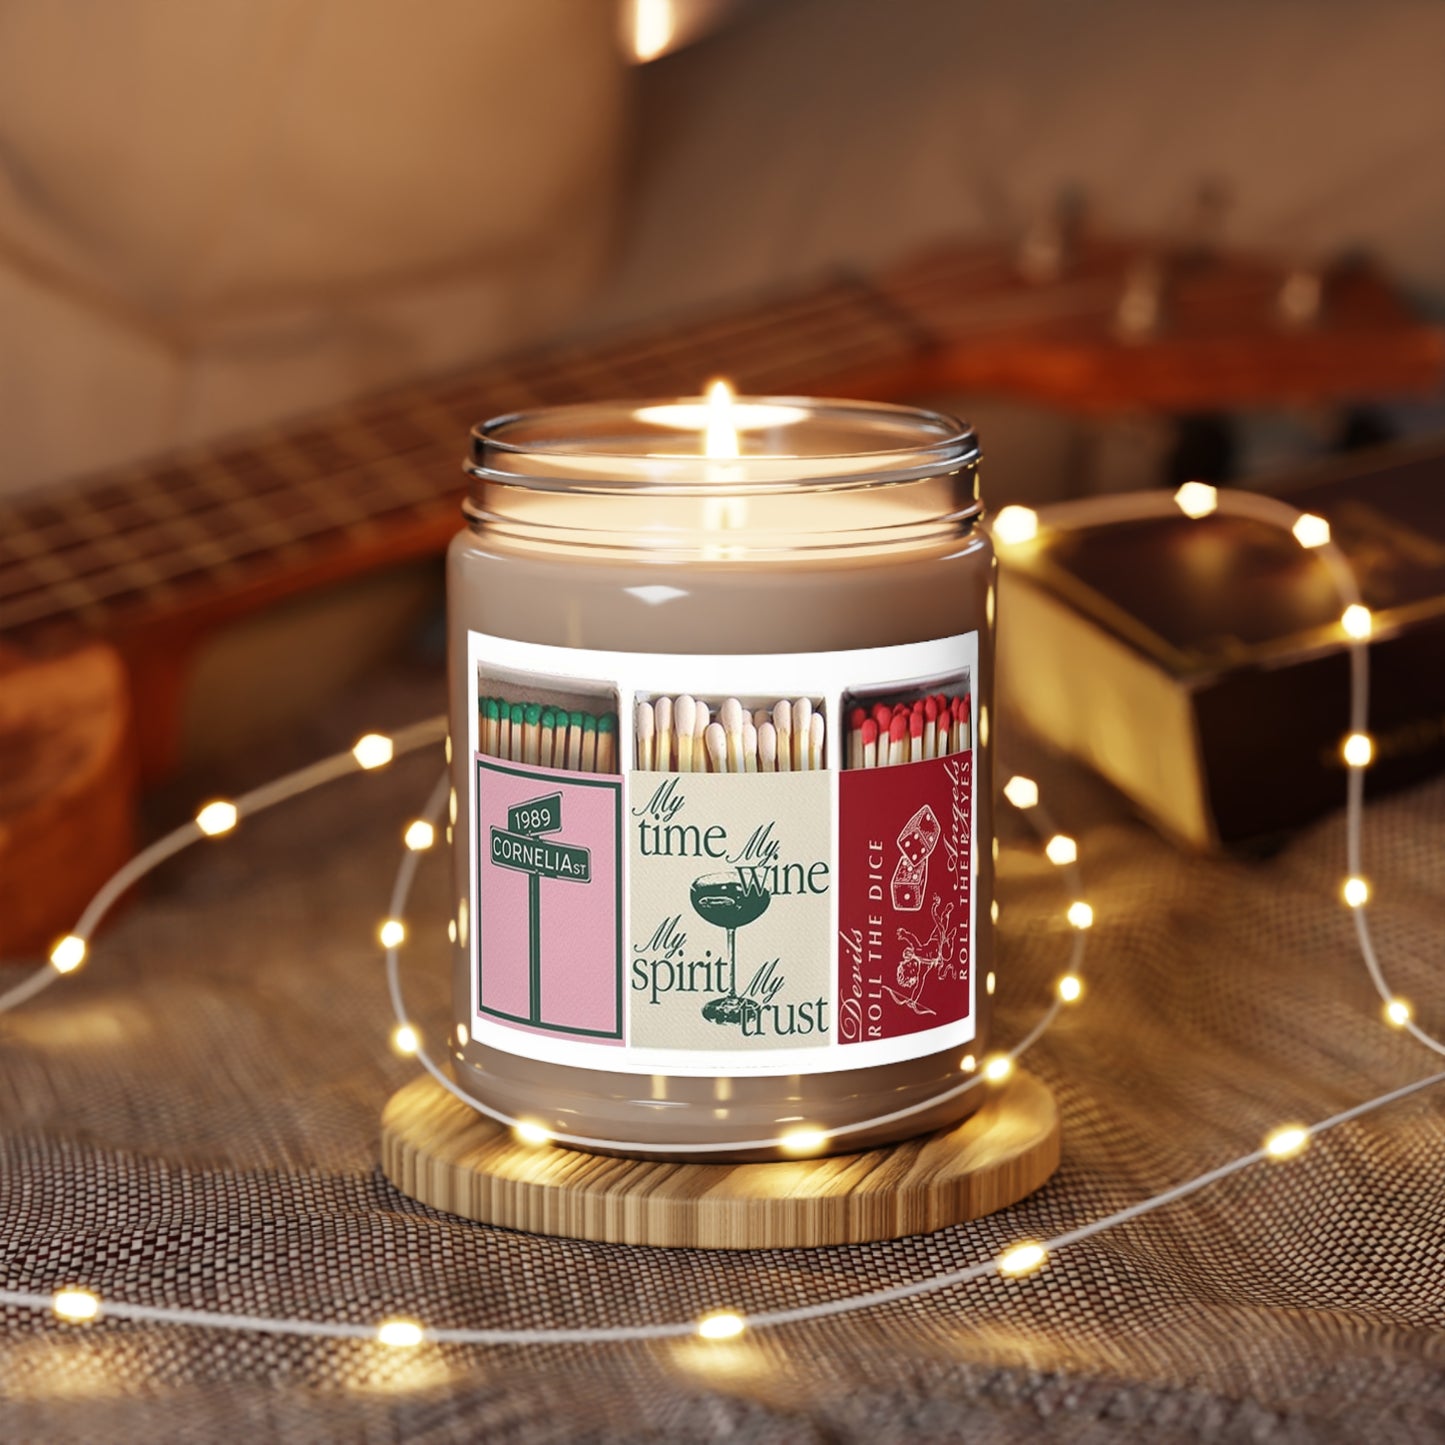 Taylor Matchbook Candle